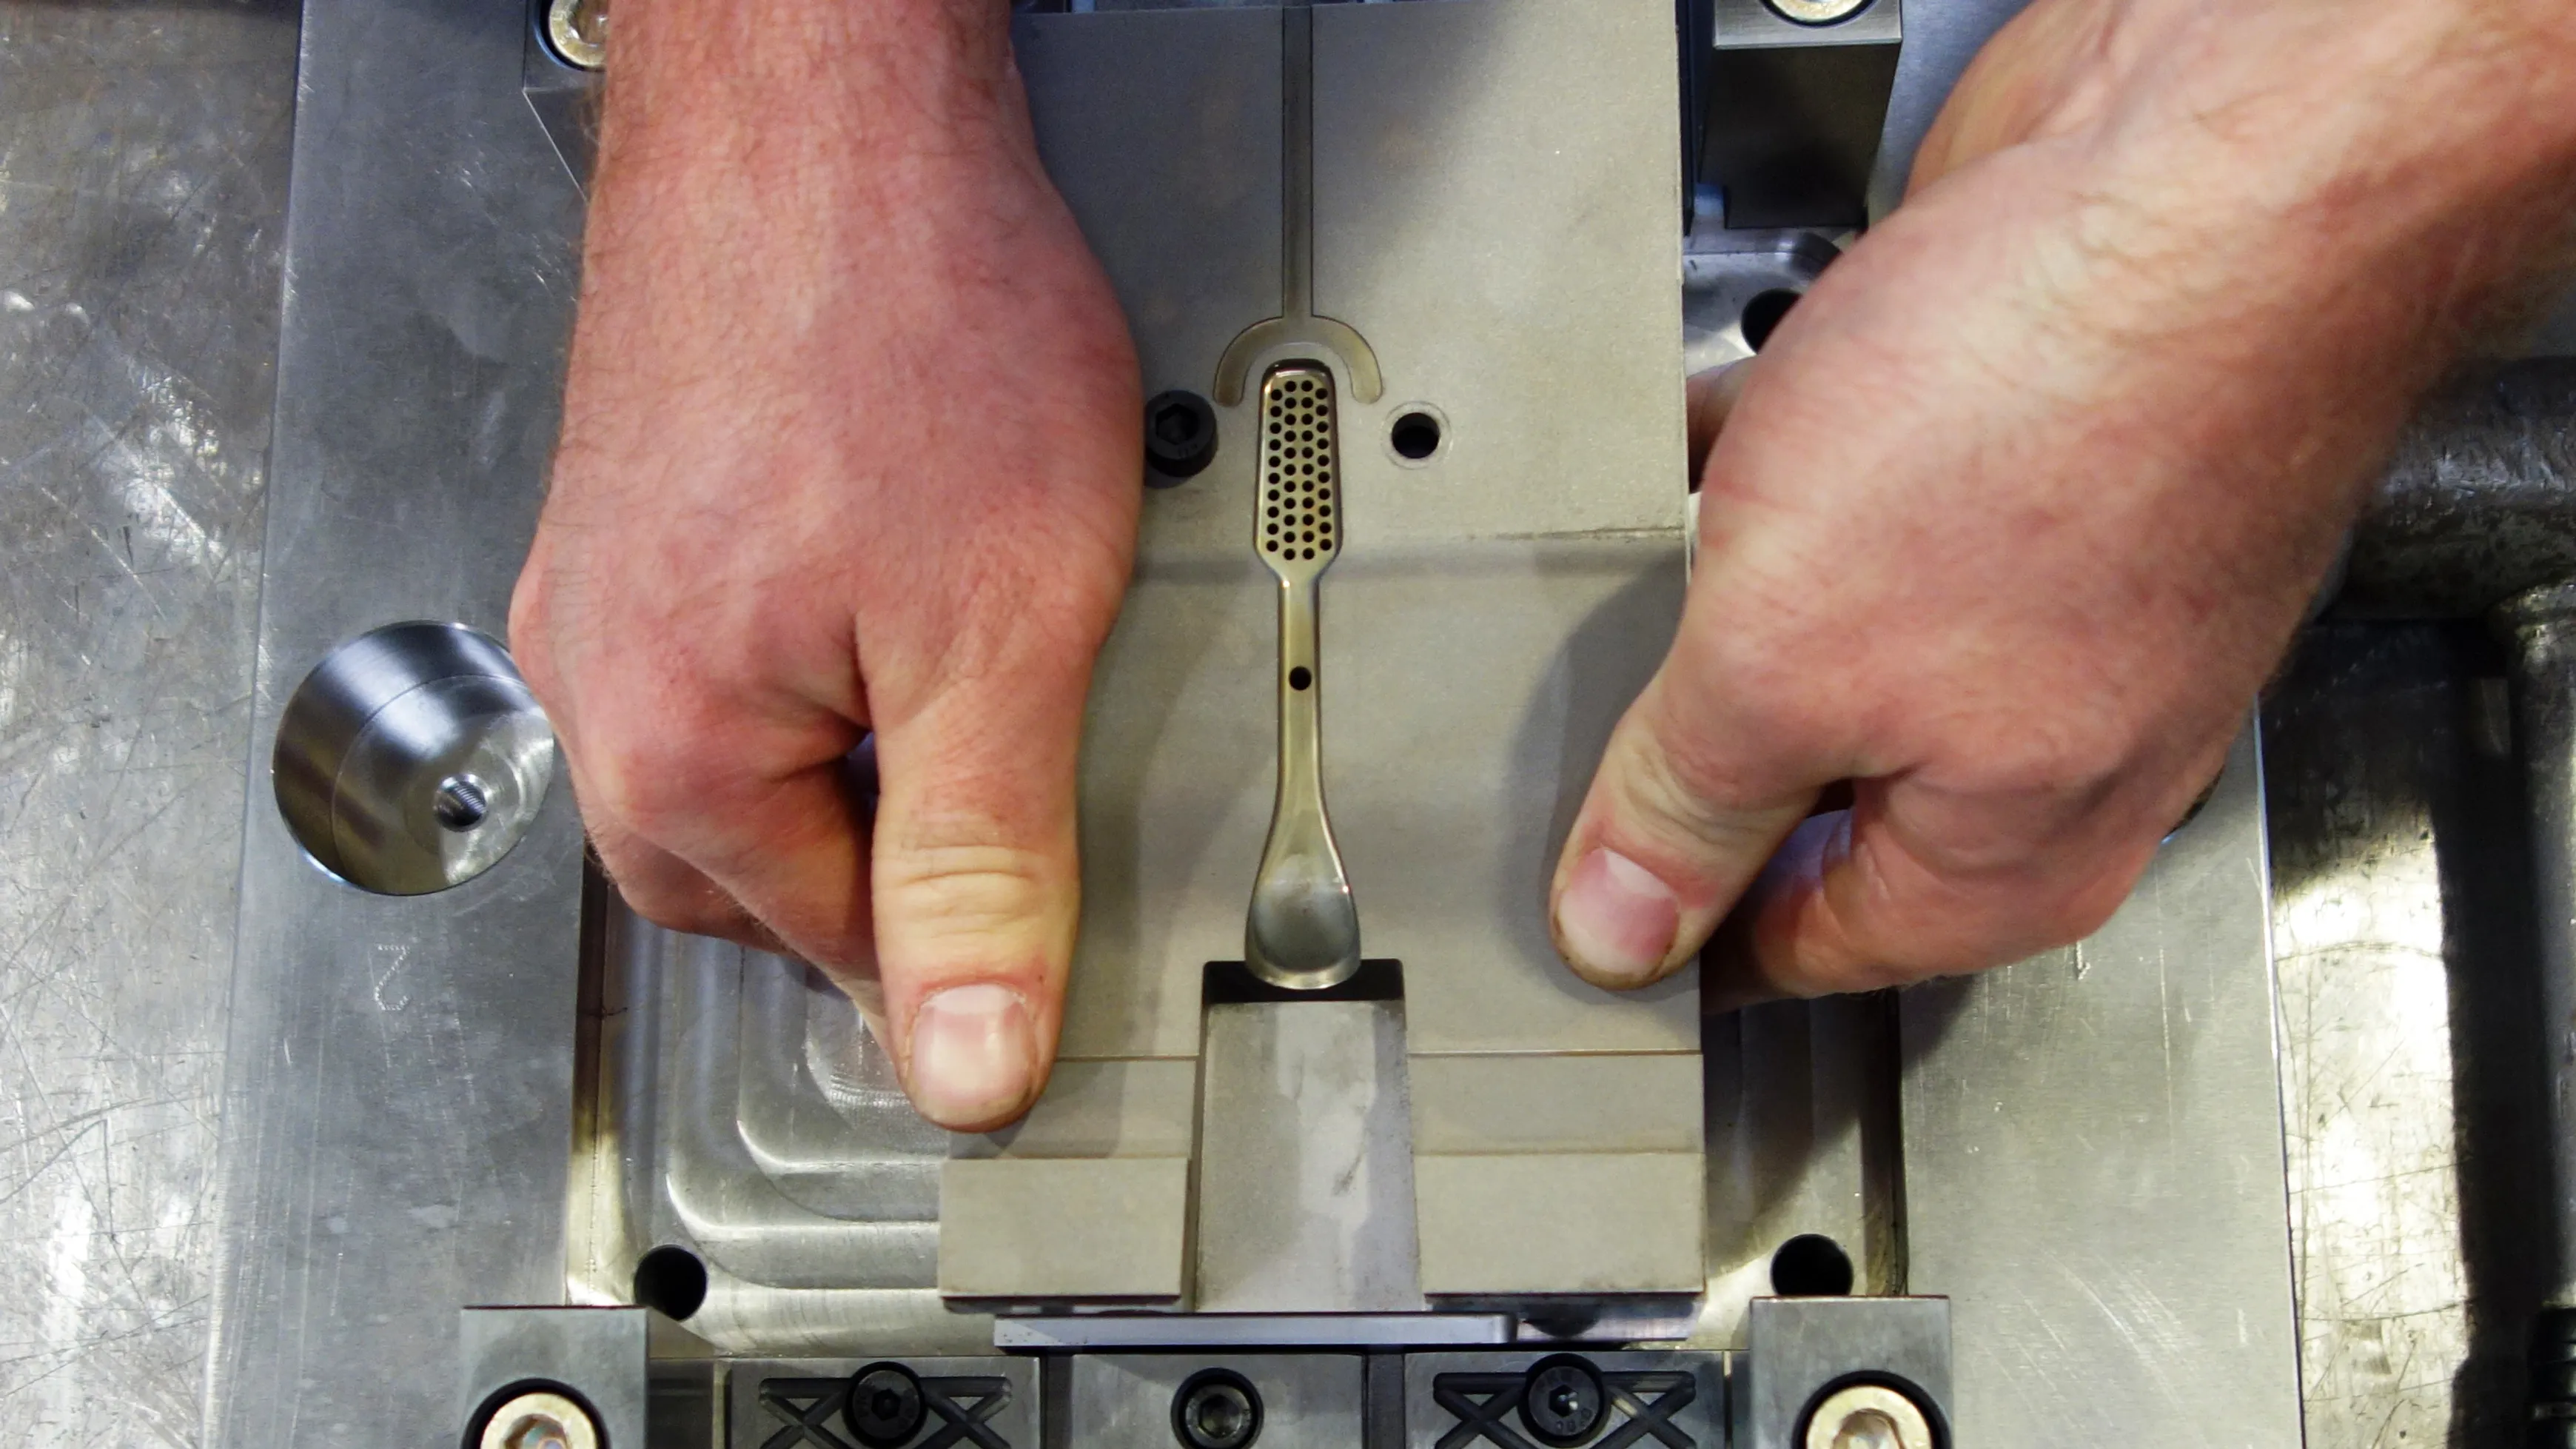 Hands holding the injection molding tool for a TIO toothbrush